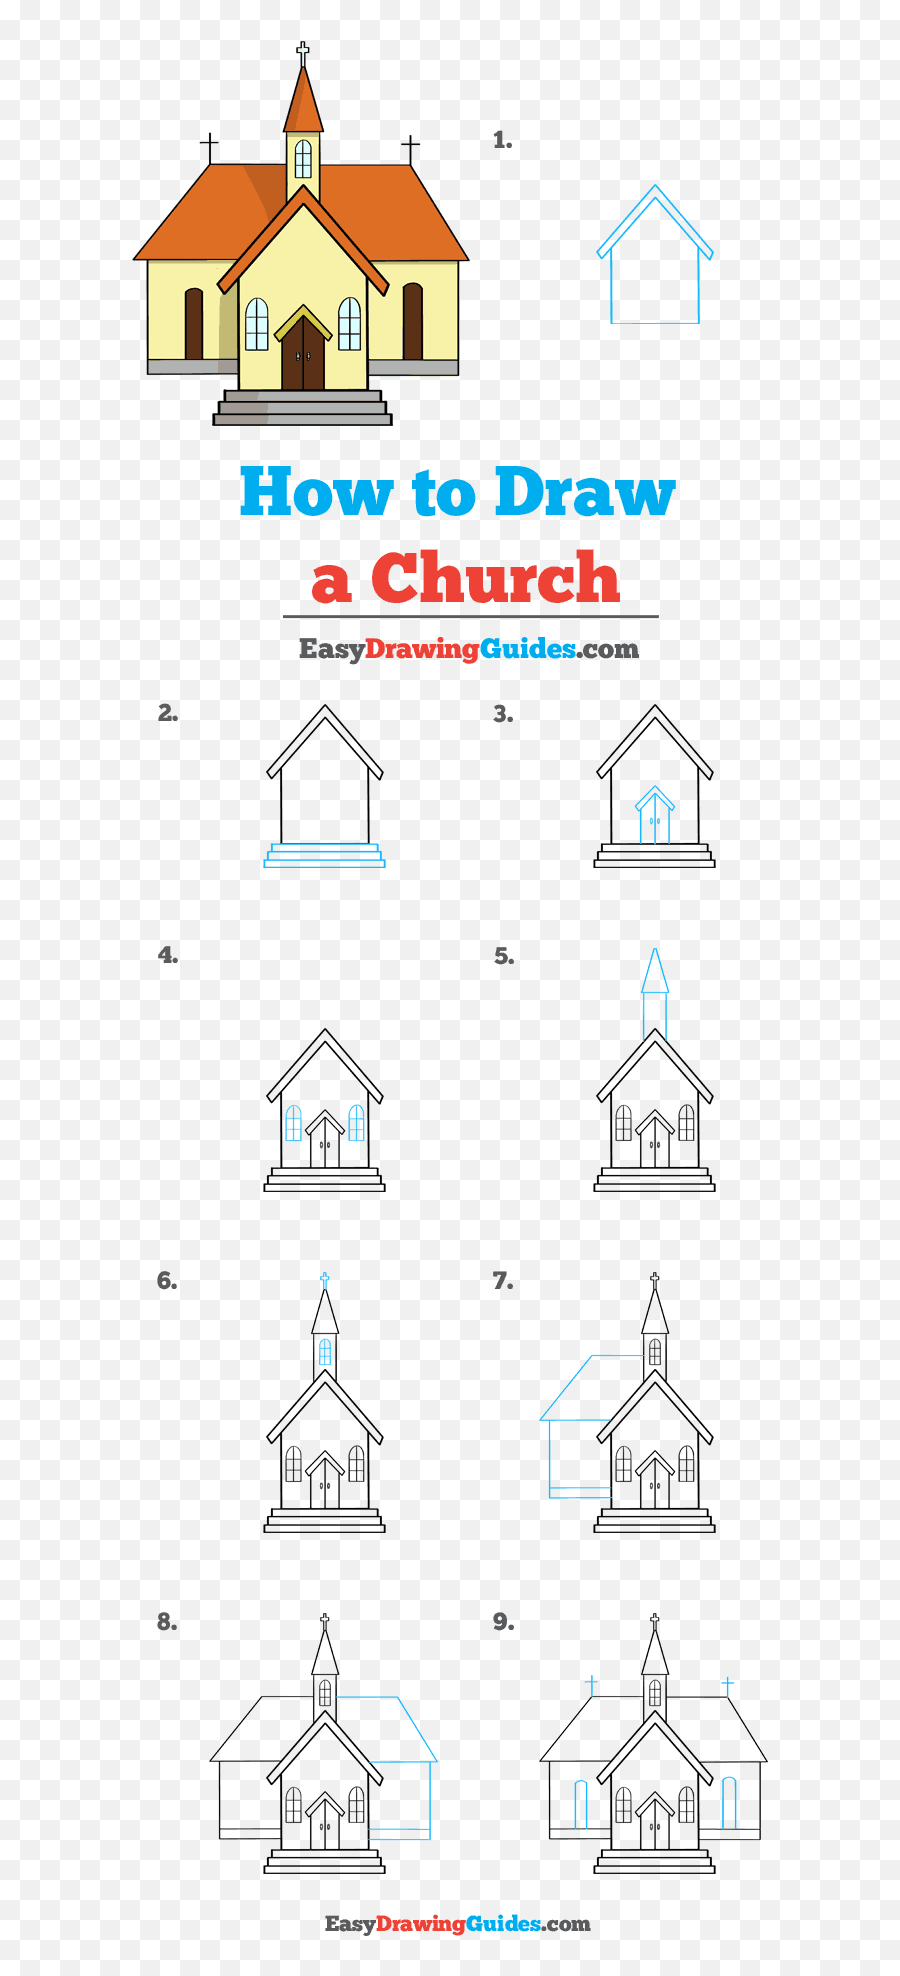 How To Draw A Church - Really Easy Drawing Tutorial Draw A Church Emoji,Church Emoji